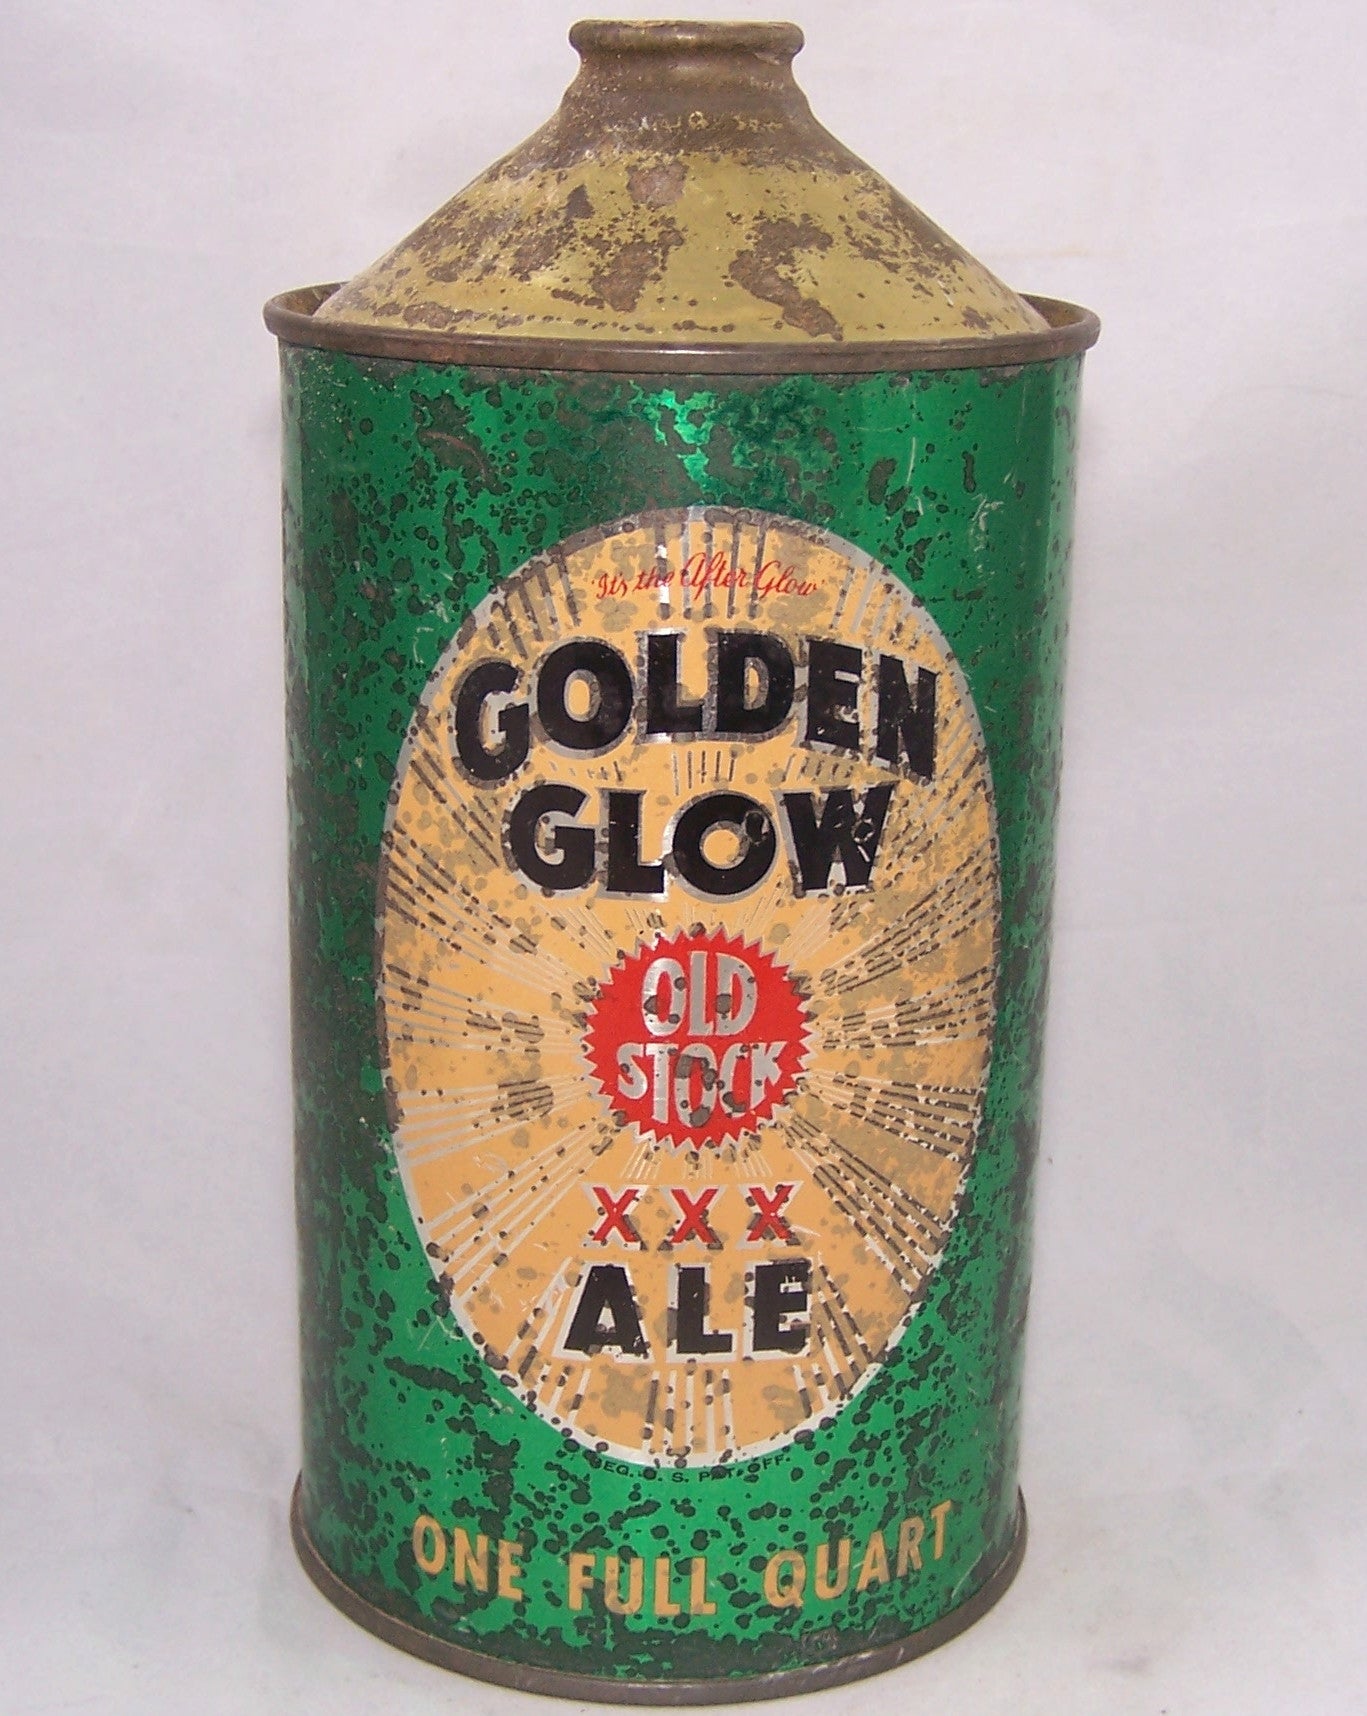 Golden Glow Ale, USBC ? Grade 2 Sold on 11/26/16